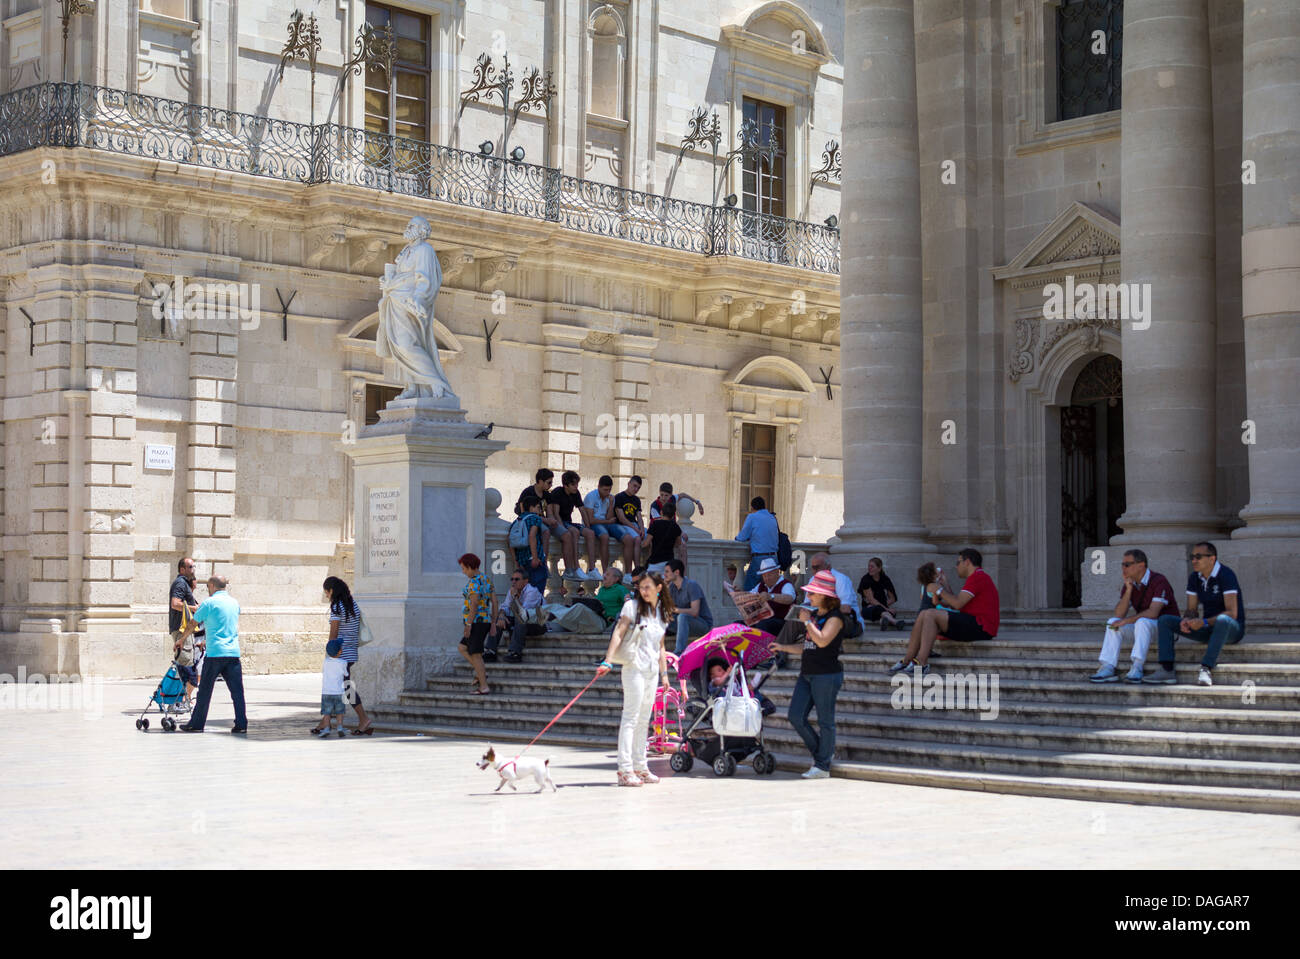 Italy, Sicily, Siracusa, Ortigia, Piazza del Duomo, people on the Cathedral stair Stock Photo